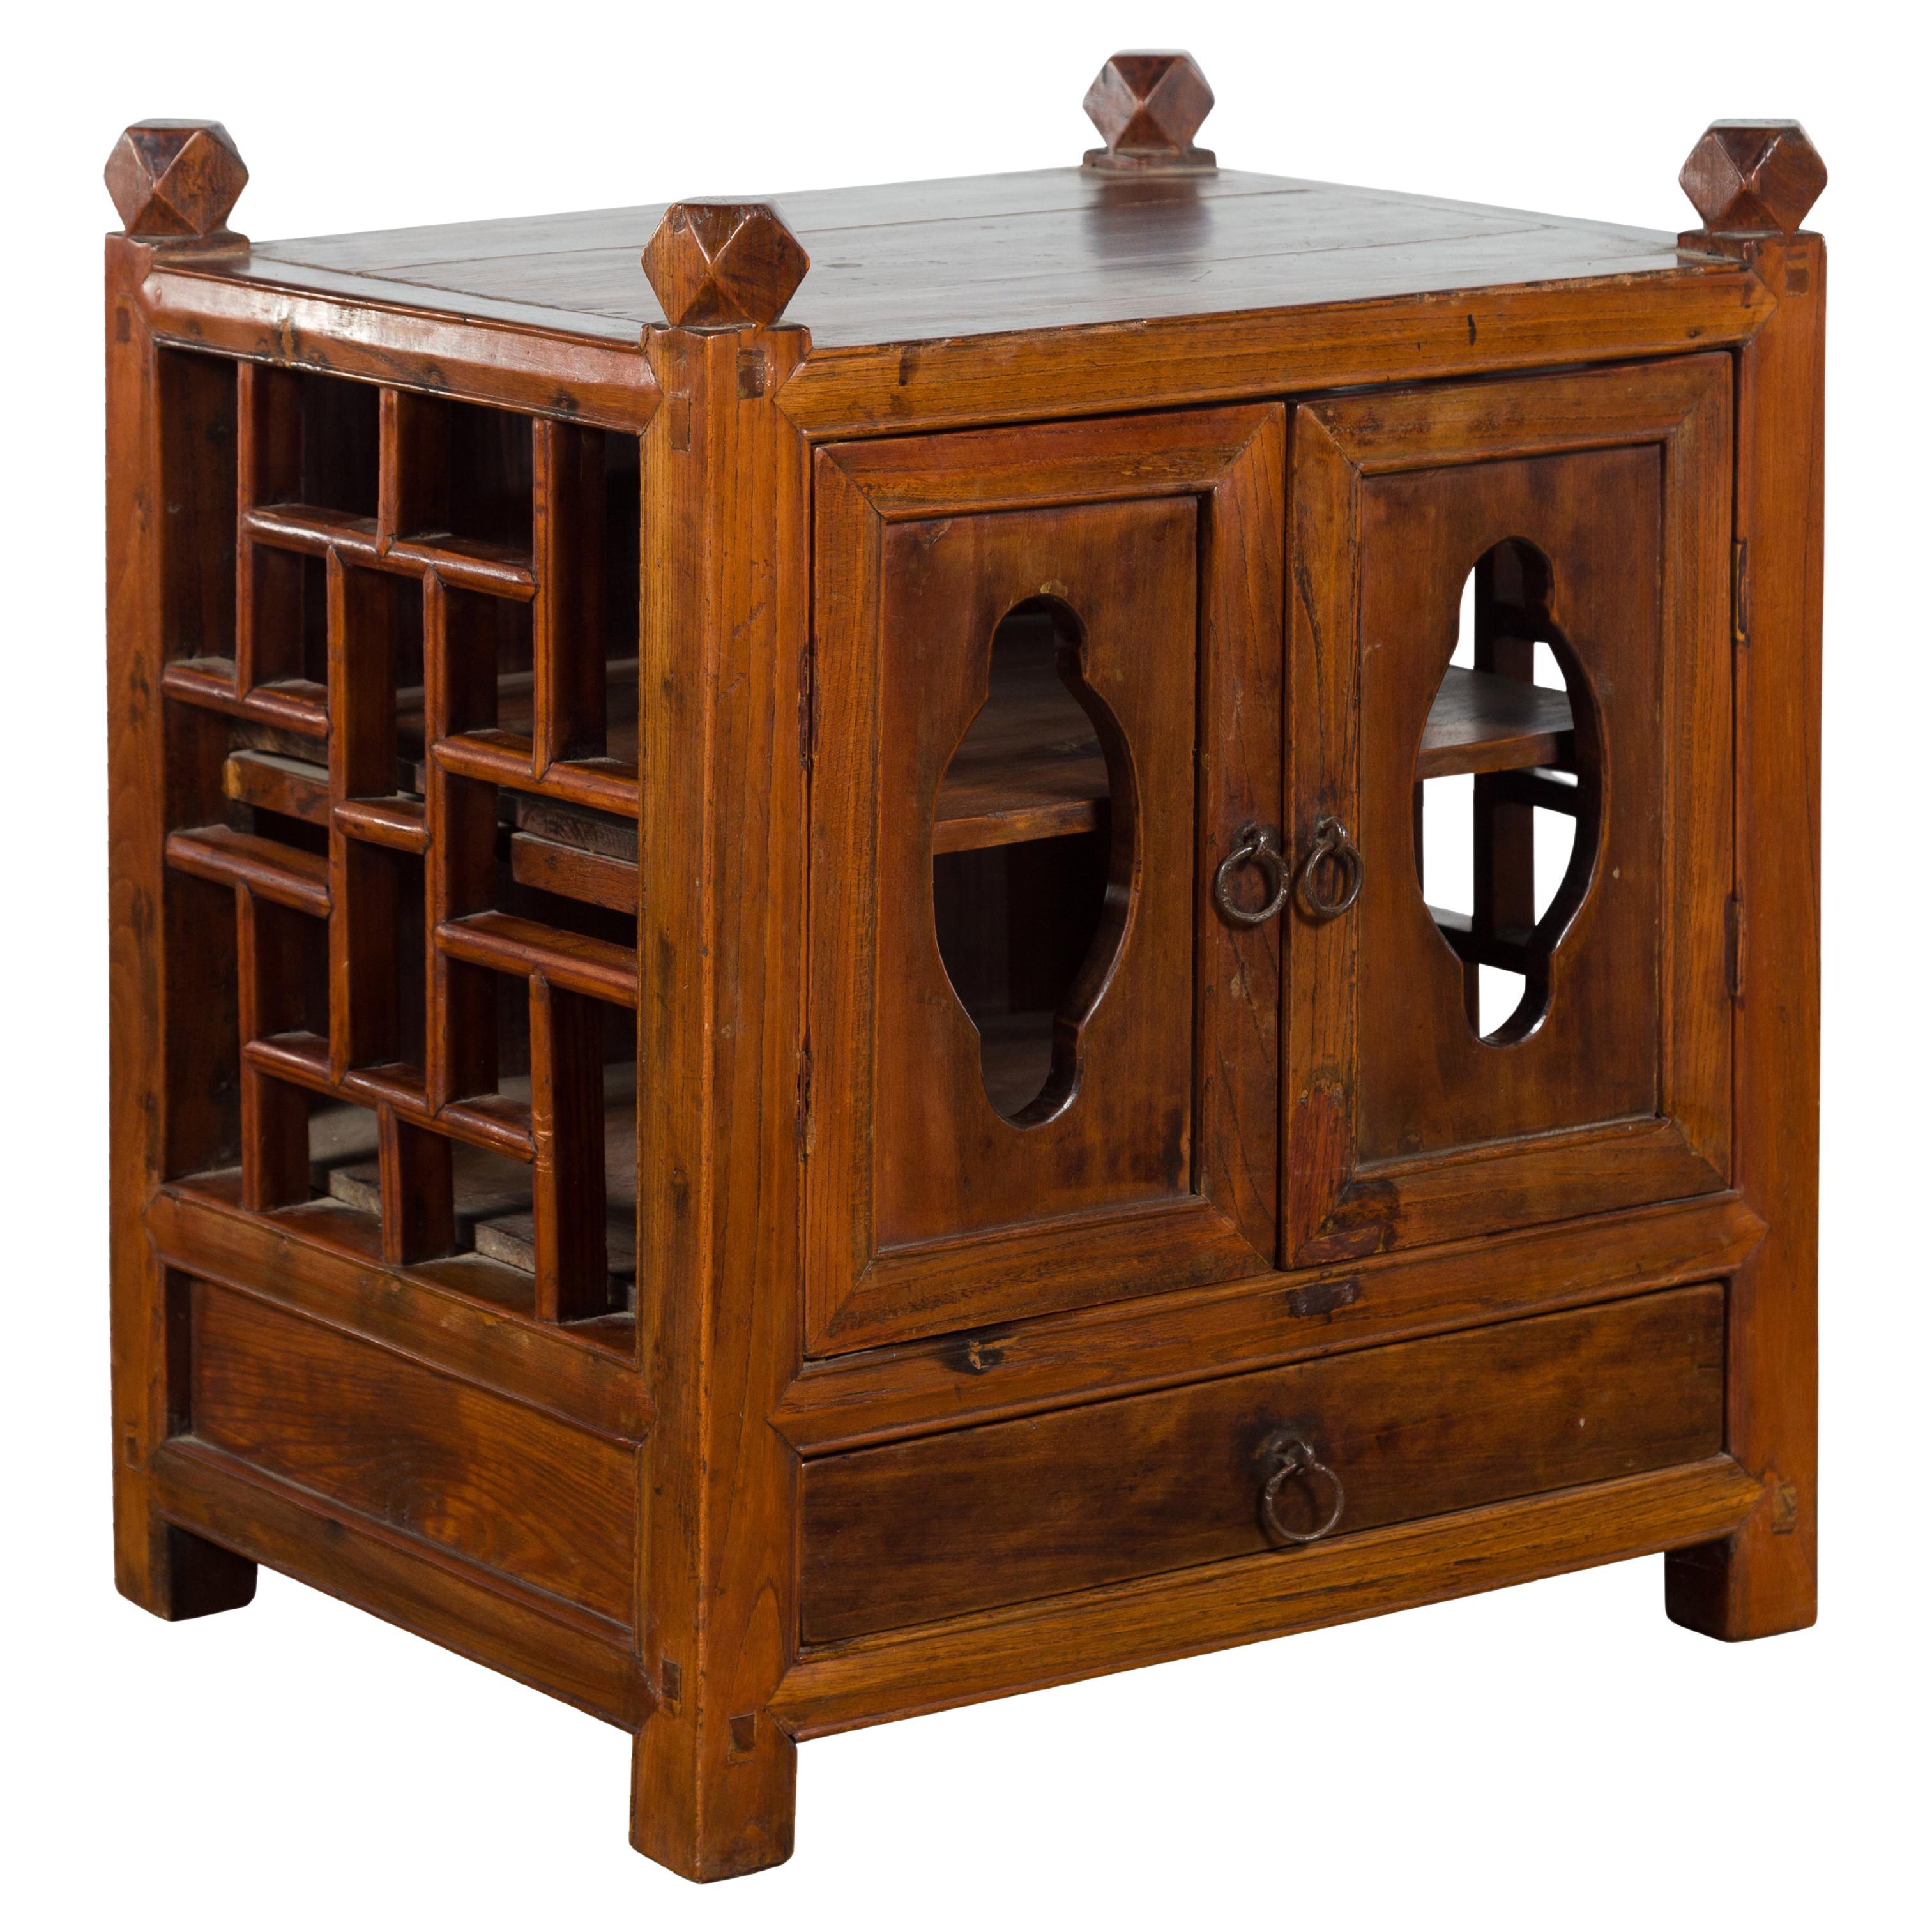 Qing Dynasty Chinese Brown Lacquered Bedside Cabinet with Fretwork Motifs